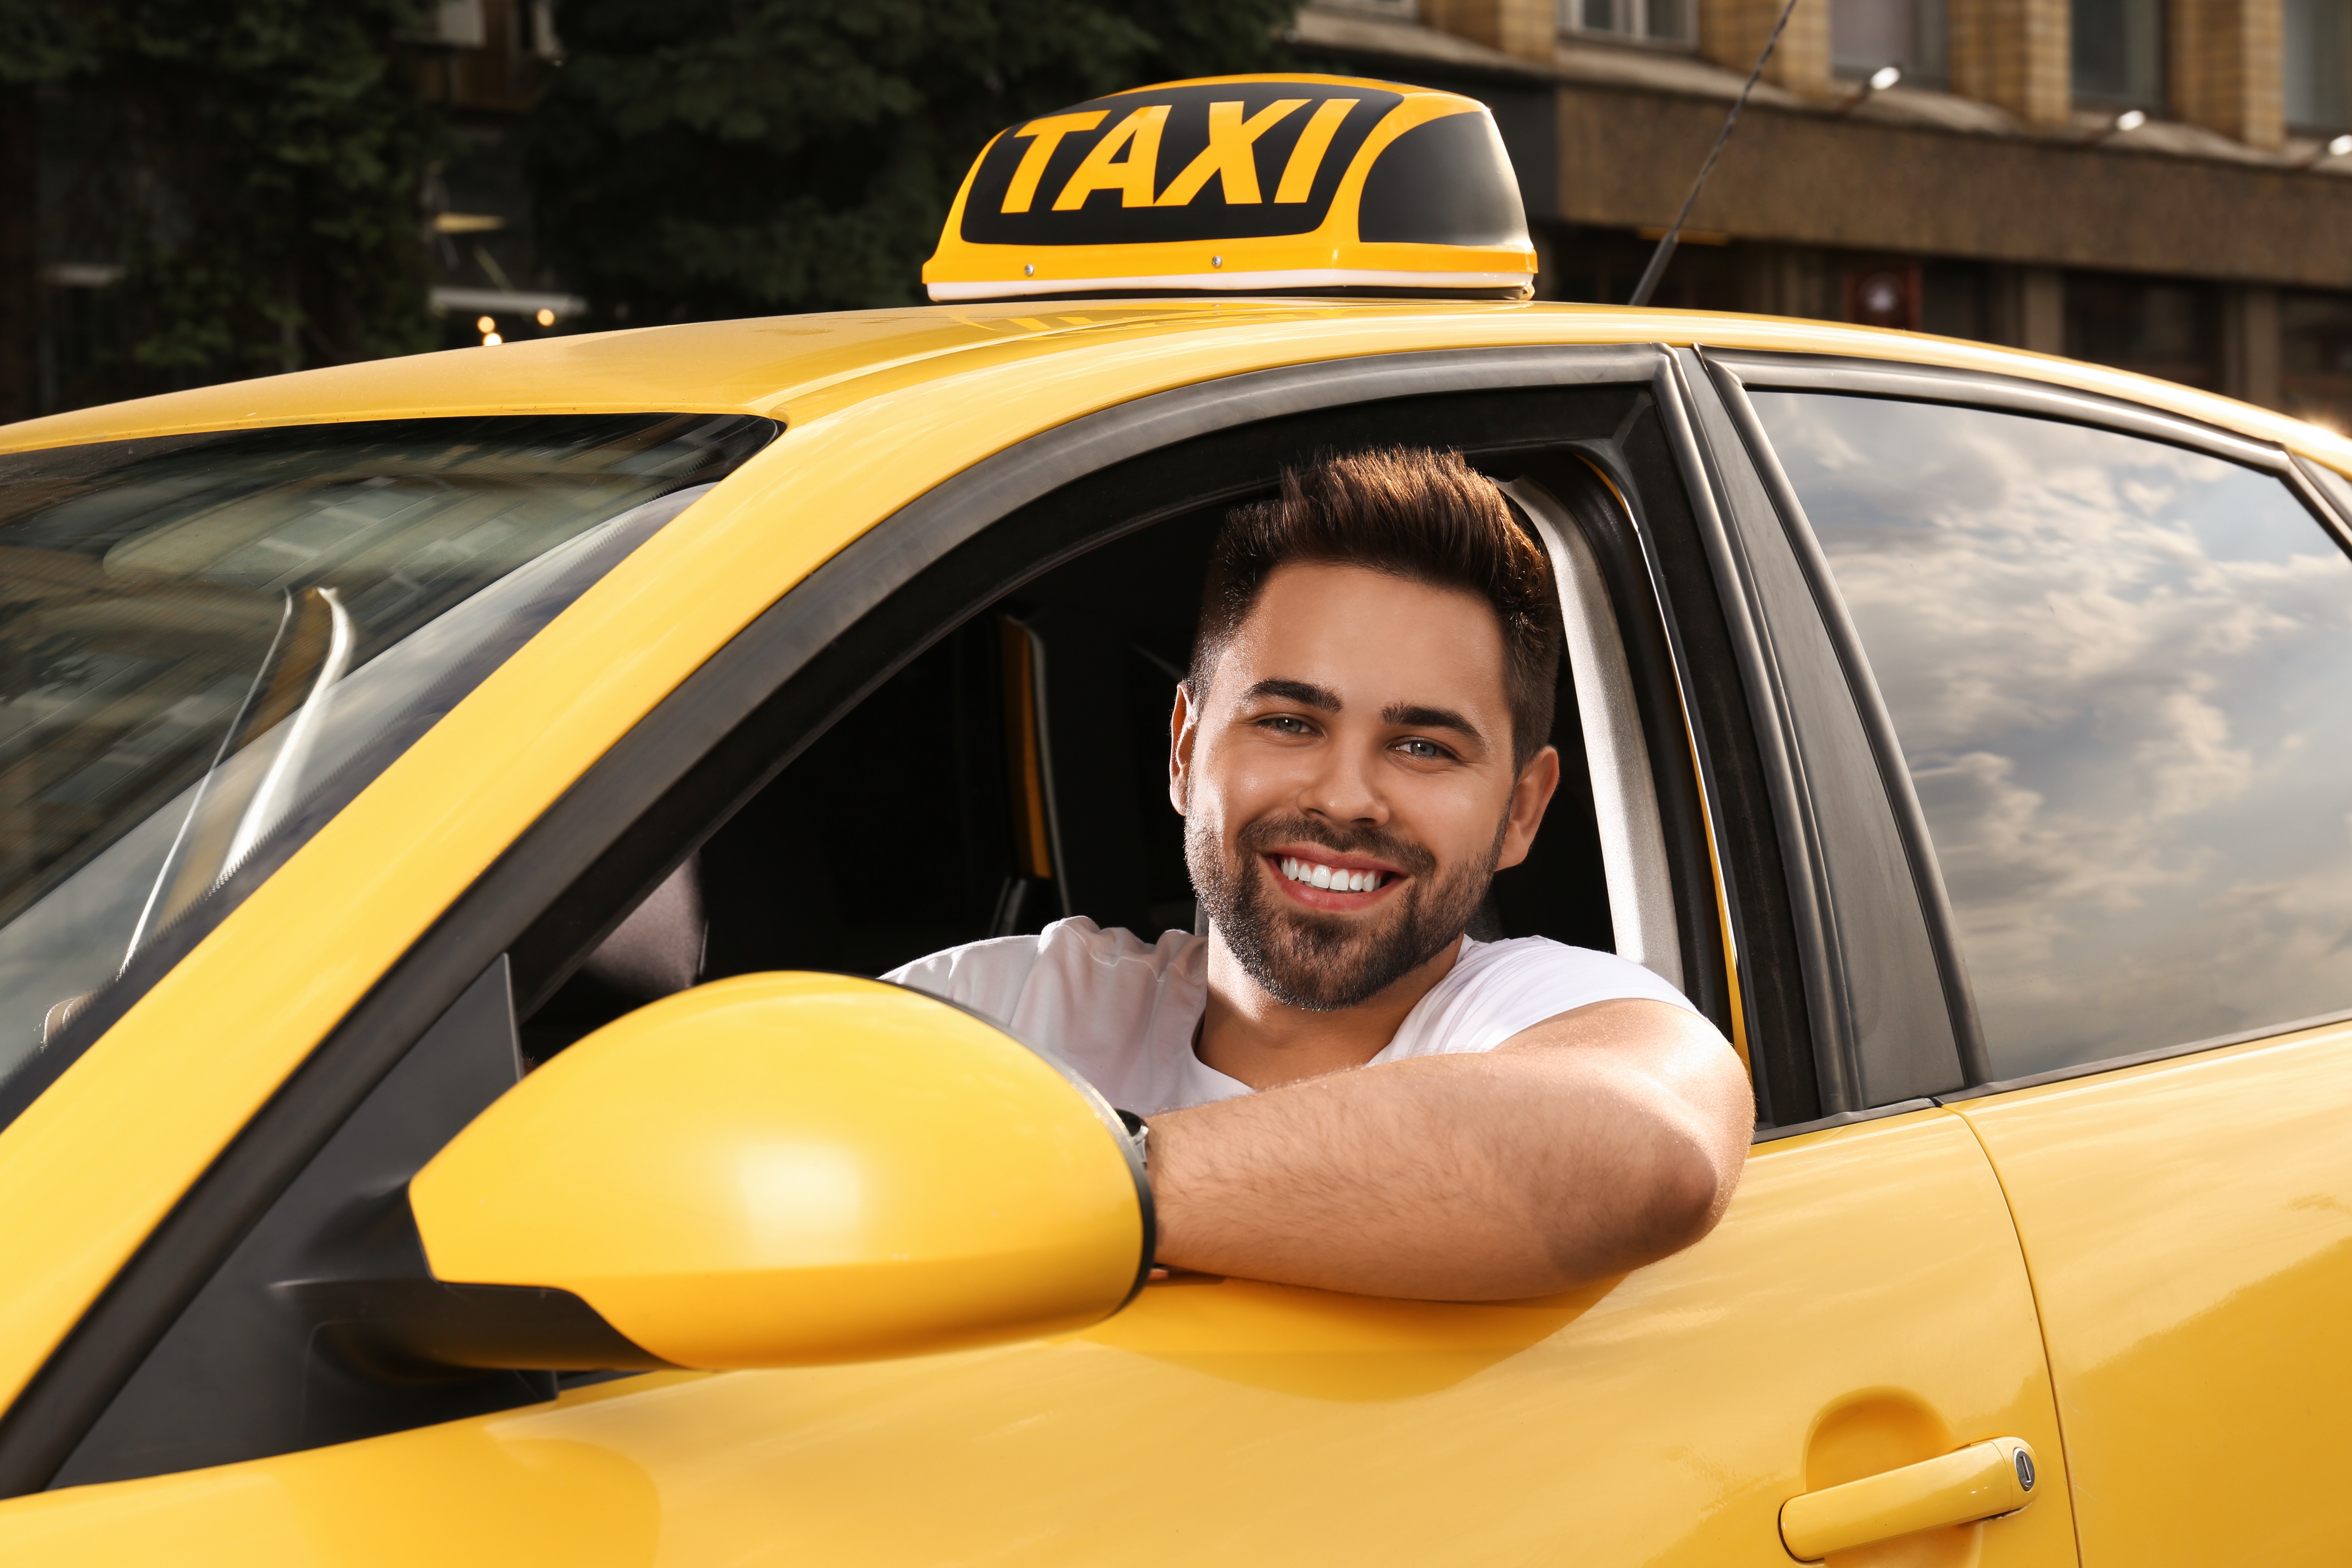 A male taxi driver in a yellow taxi | Source: Shutterstock